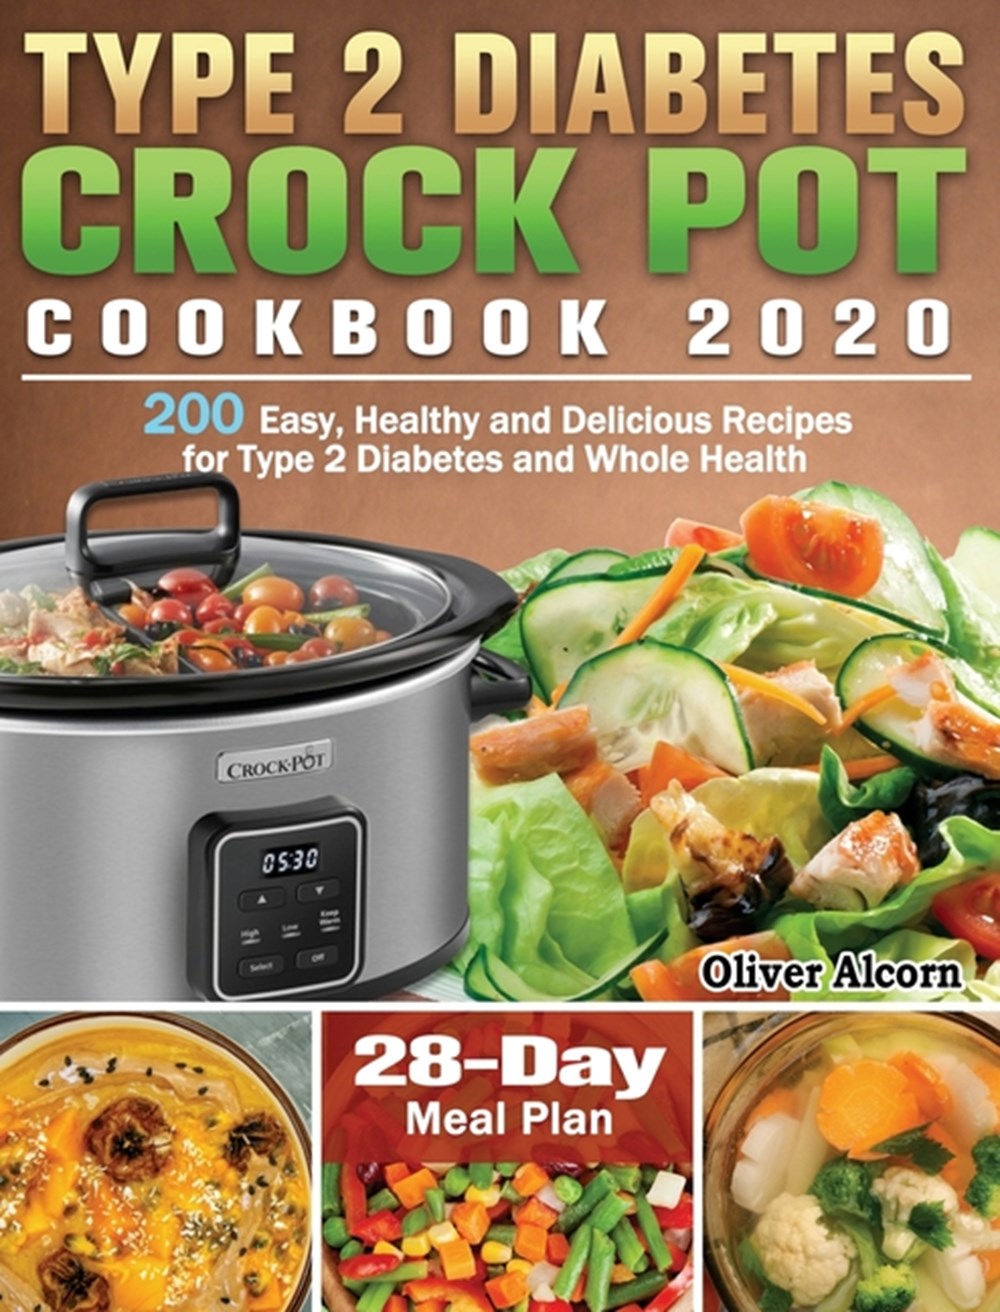 Type 2 Diabetes Crock Pot Cookbook 2020: 200 Easy, Healthy and Delicious Recipes for Type 2 Diabetes